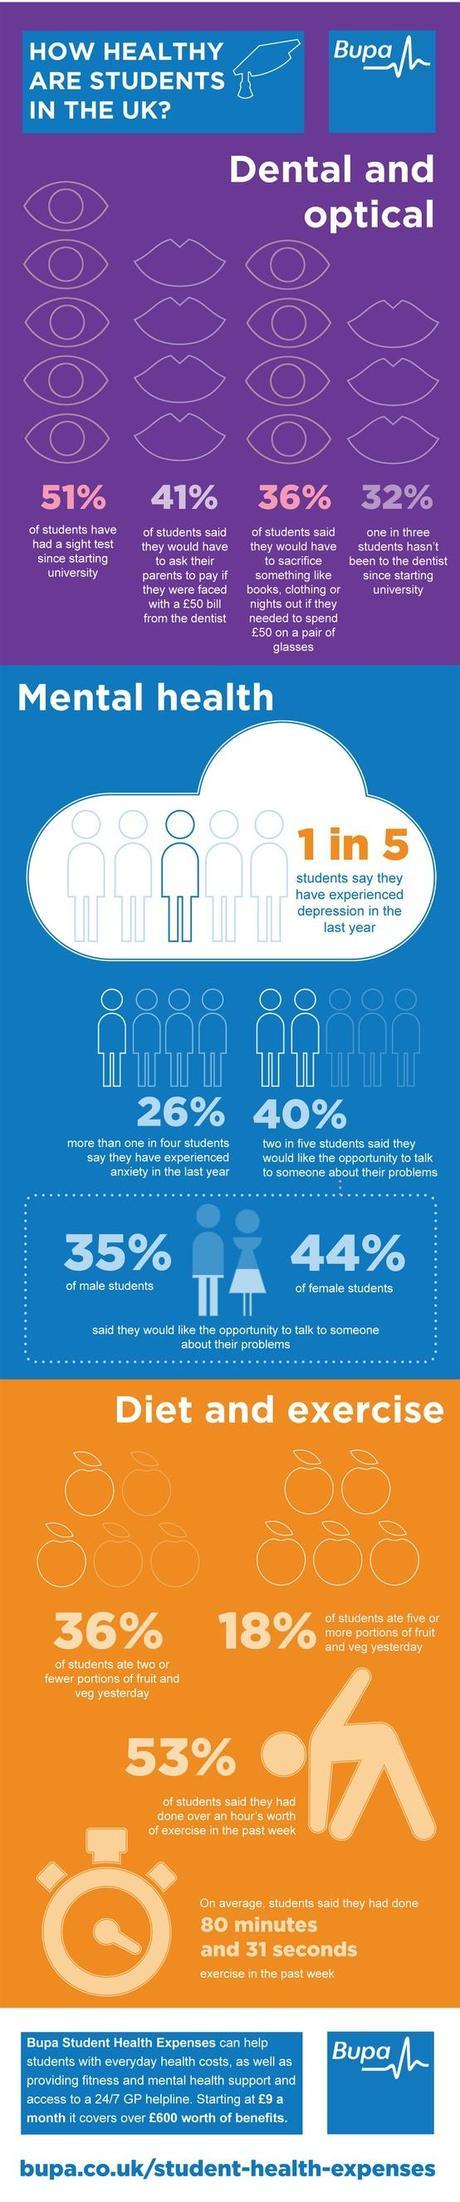 An #infographic by #BUPA breaking down the state of #studenthealth- 1/3 haven't visited the dentist since they started university, and only 20% get 5 or more fruit and veg day to day.